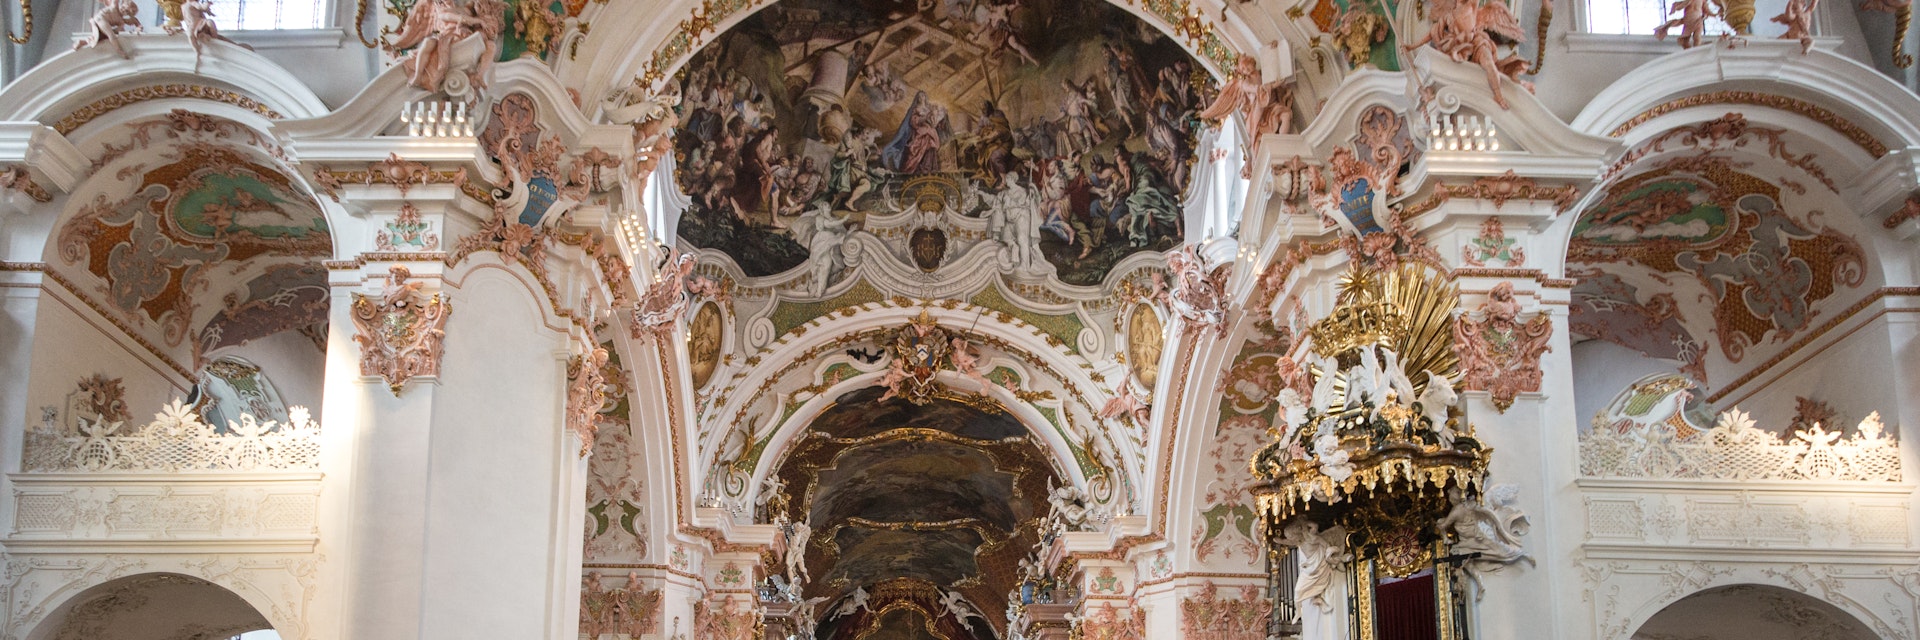 The interior of the Einsiedeln abbey.